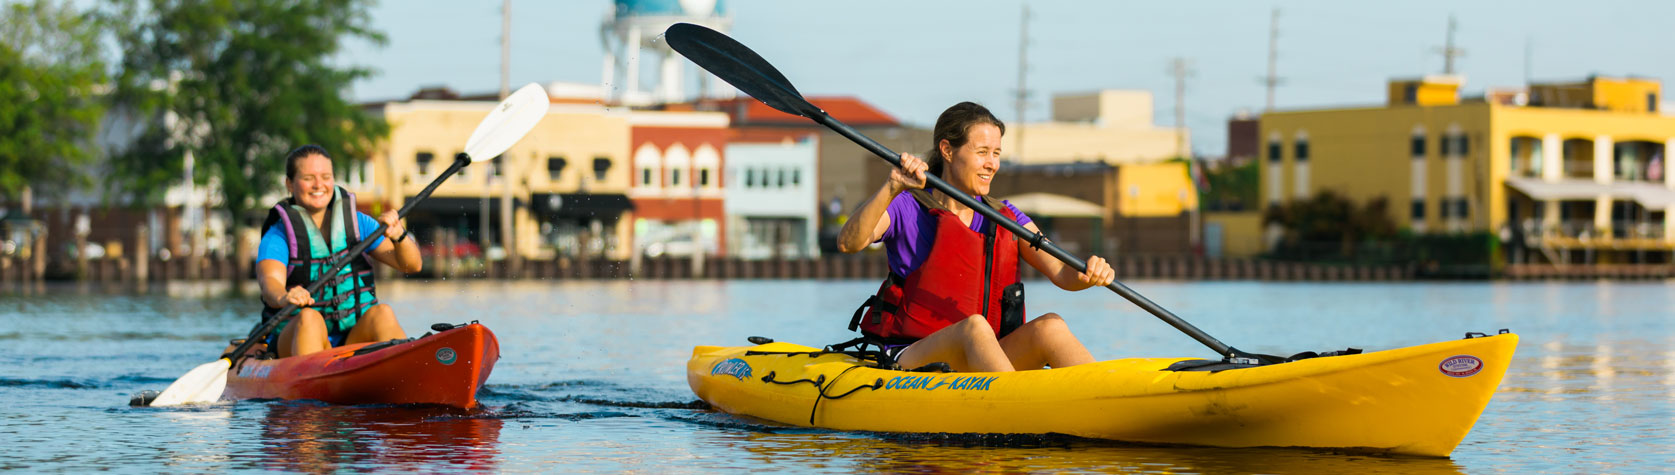 women kayaking on downtown waterfront river with buildings in background